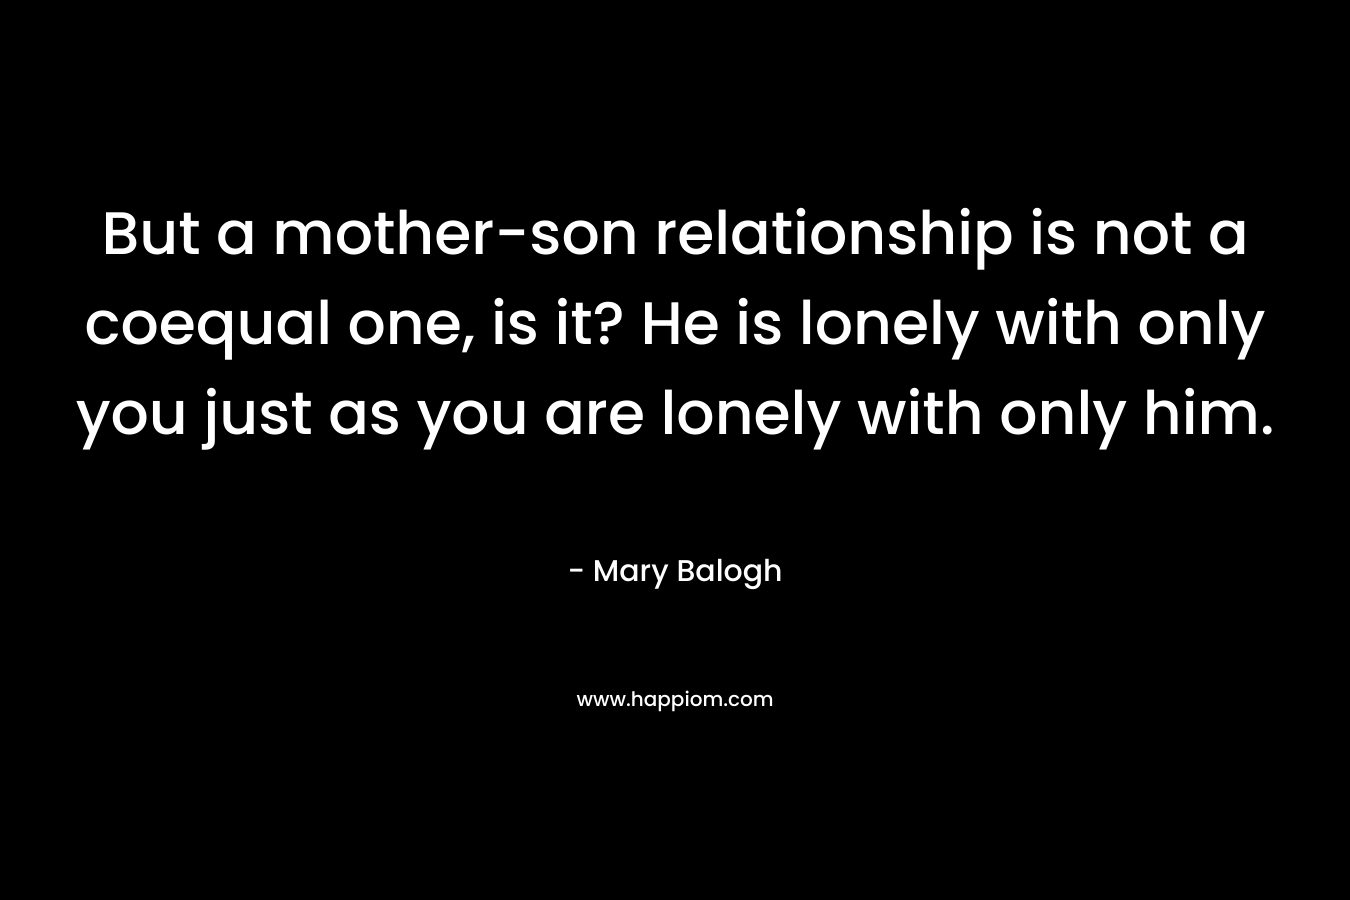 But a mother-son relationship is not a coequal one, is it? He is lonely with only you just as you are lonely with only him. – Mary Balogh